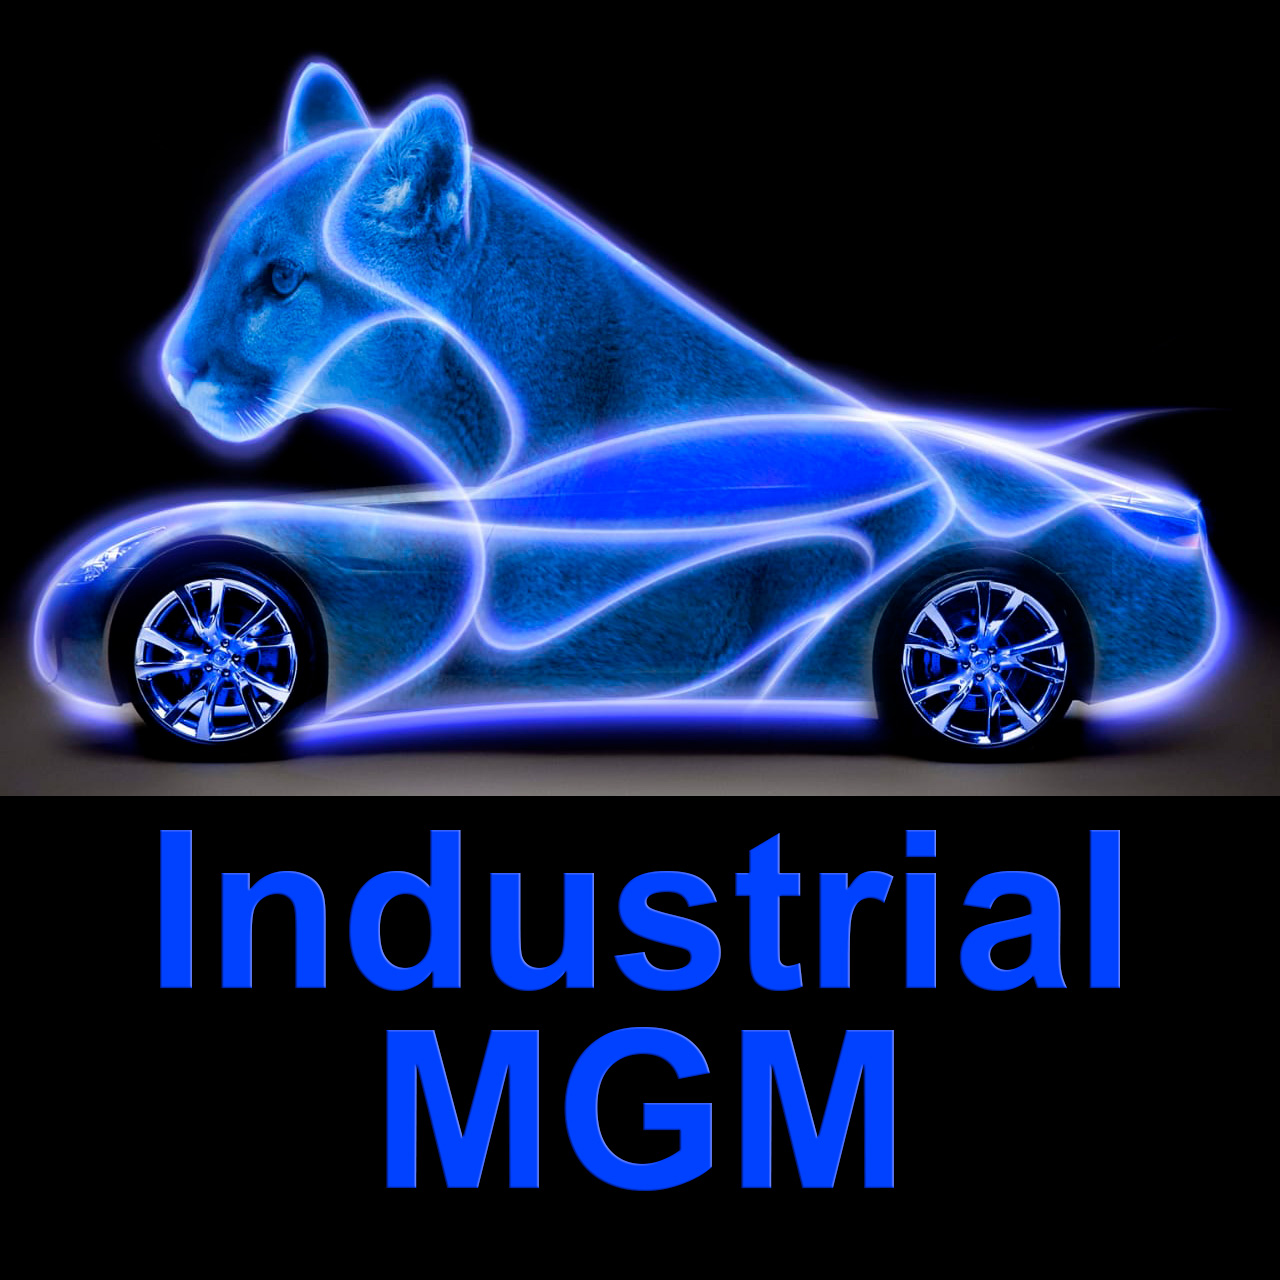 Industrial MGM